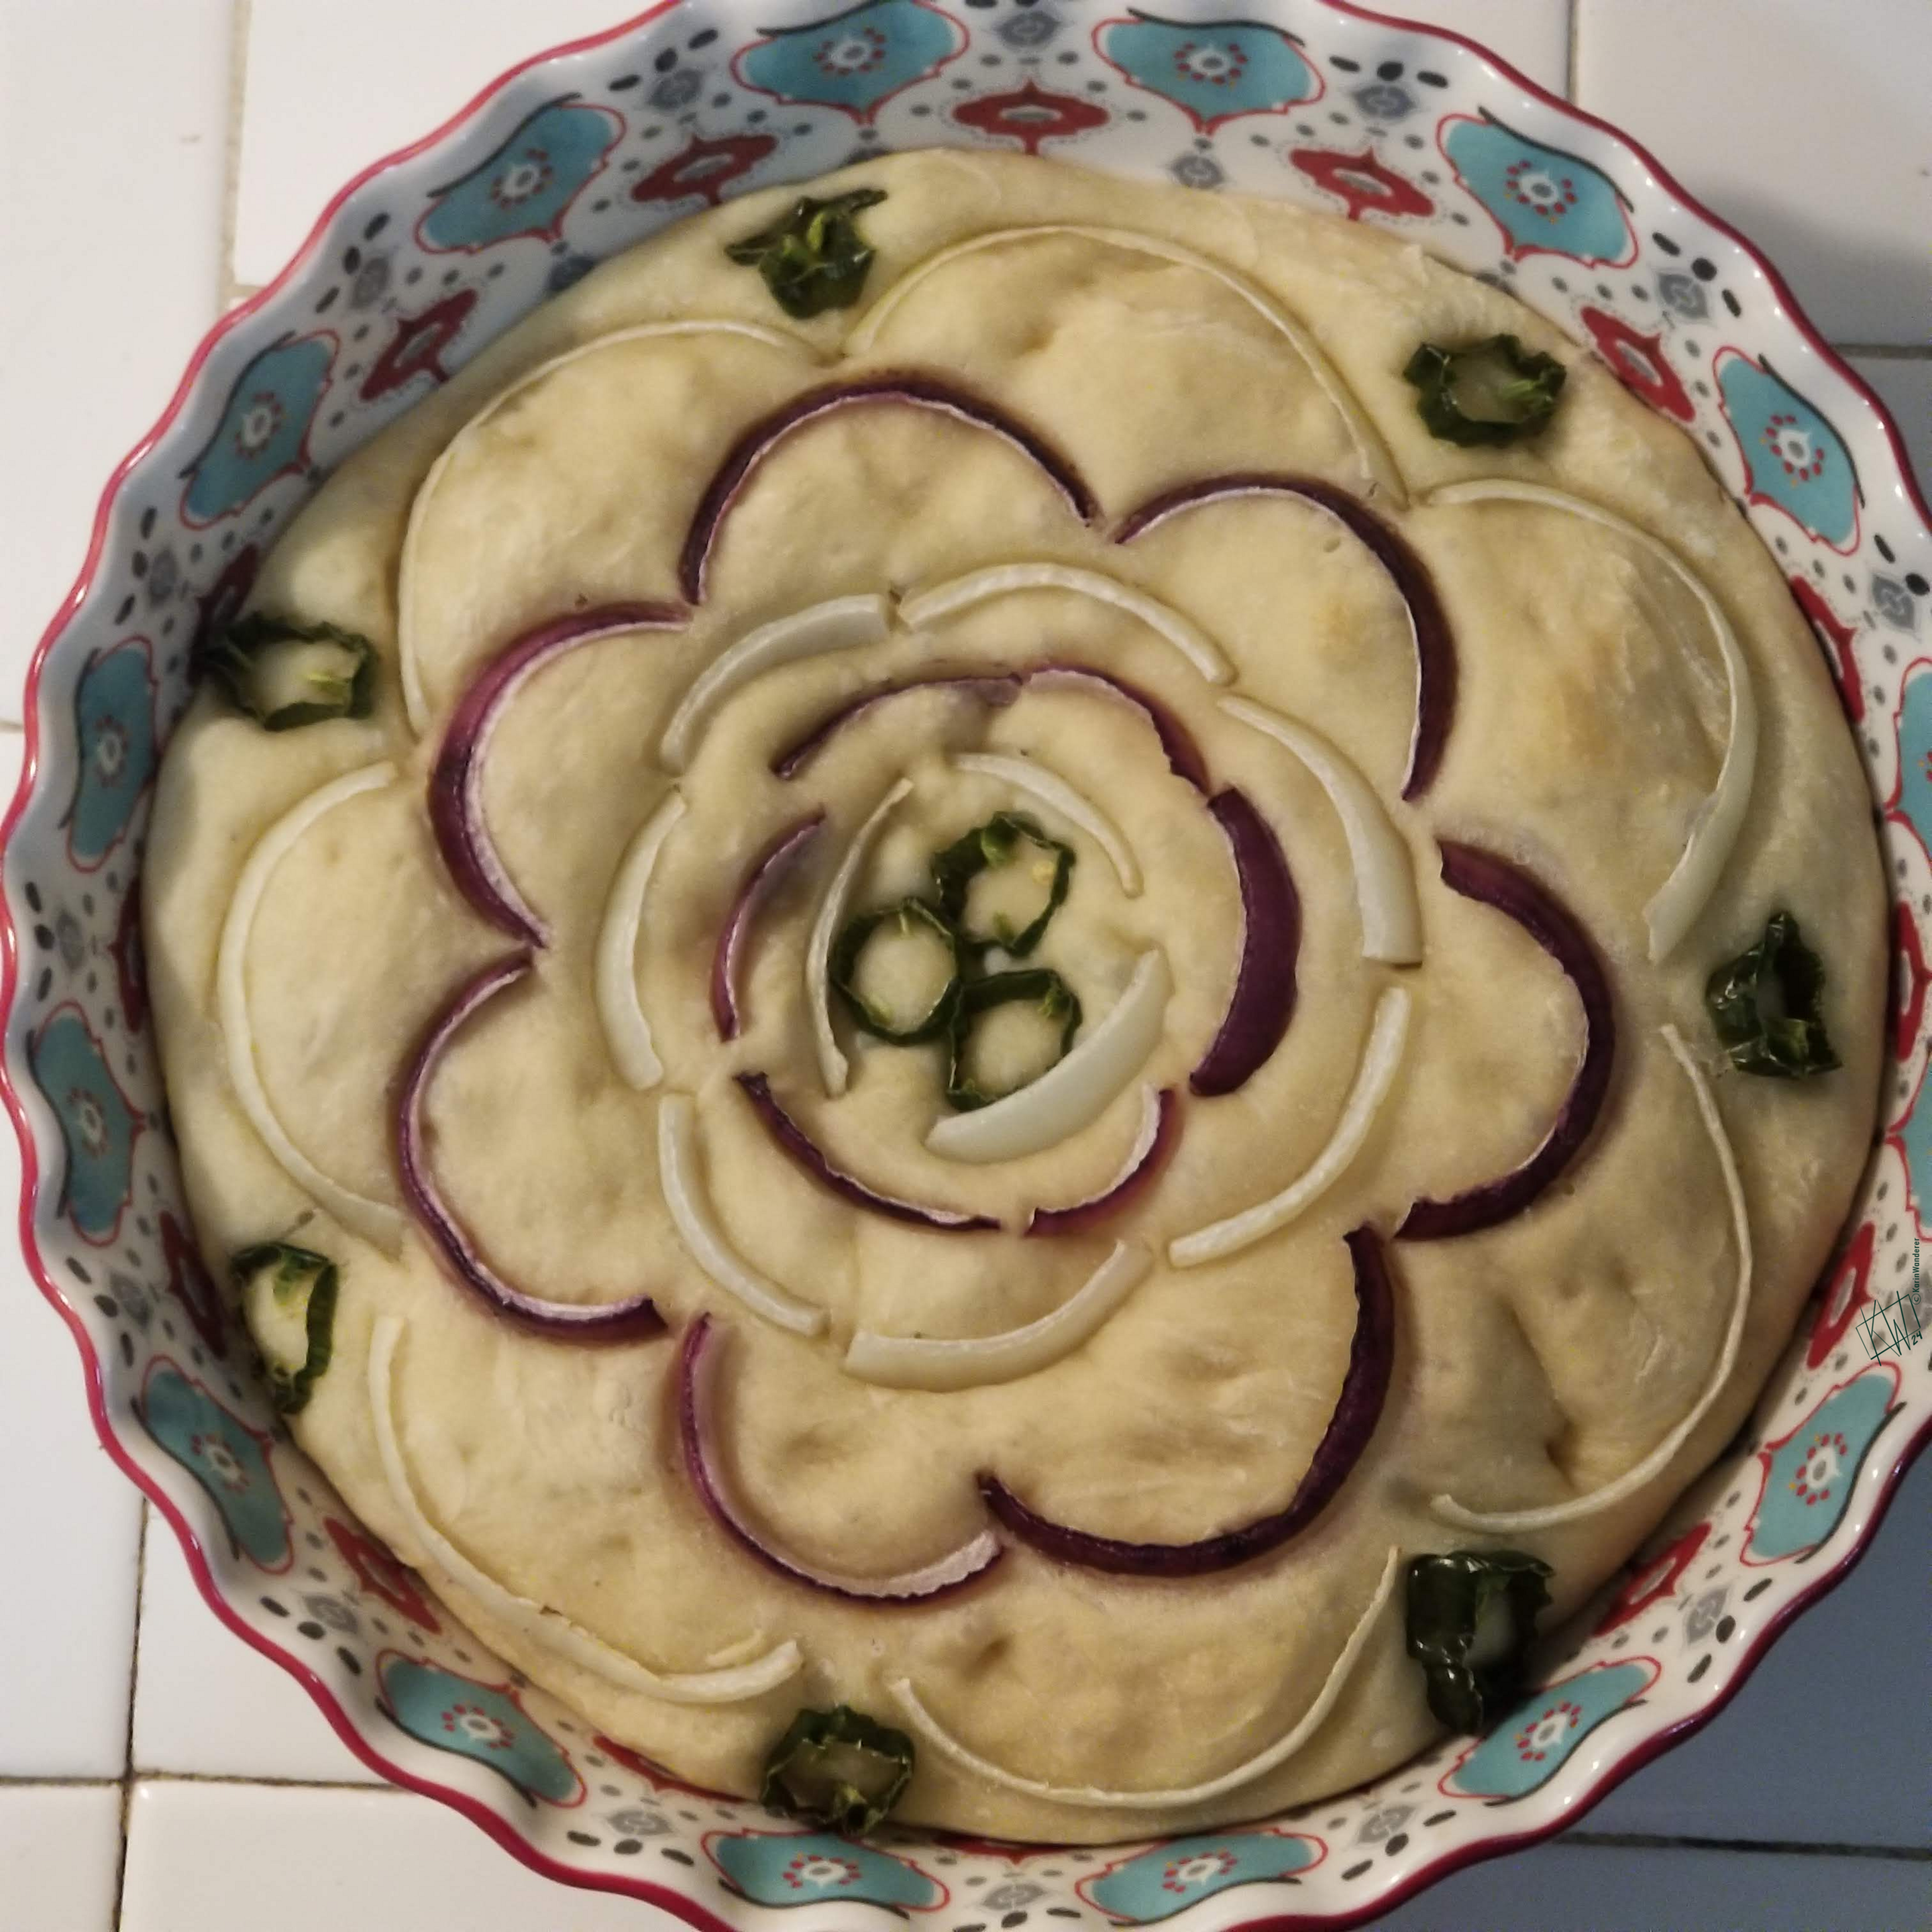 A loaf of focaccia in a round baking dish decorated with purple & white onions with shishito peppers sliced & arranged to look like a flower, baked light golden brown.